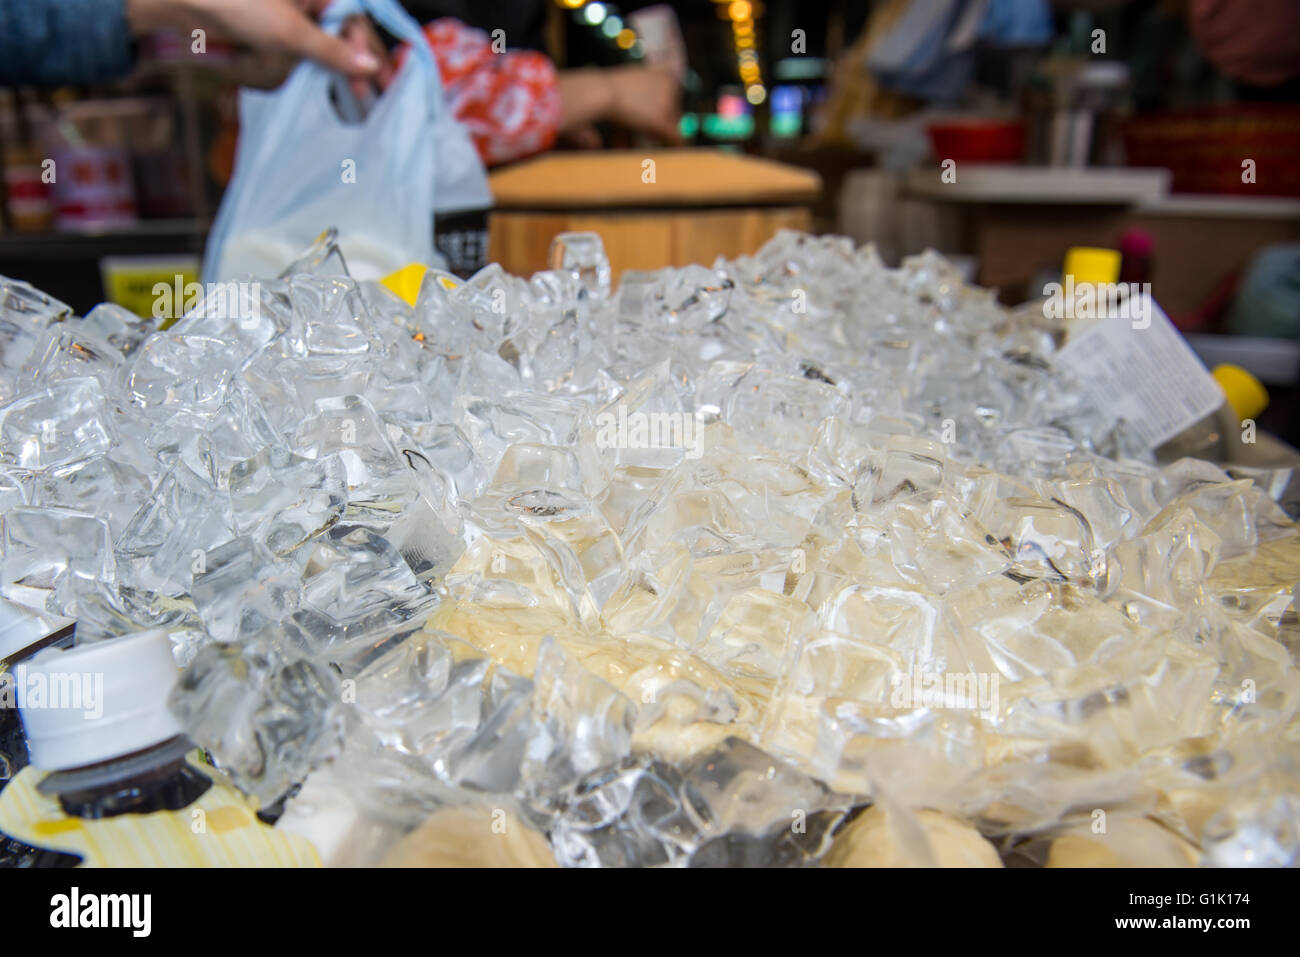 close up of small ice blocks covering drink bottles Stock Photo